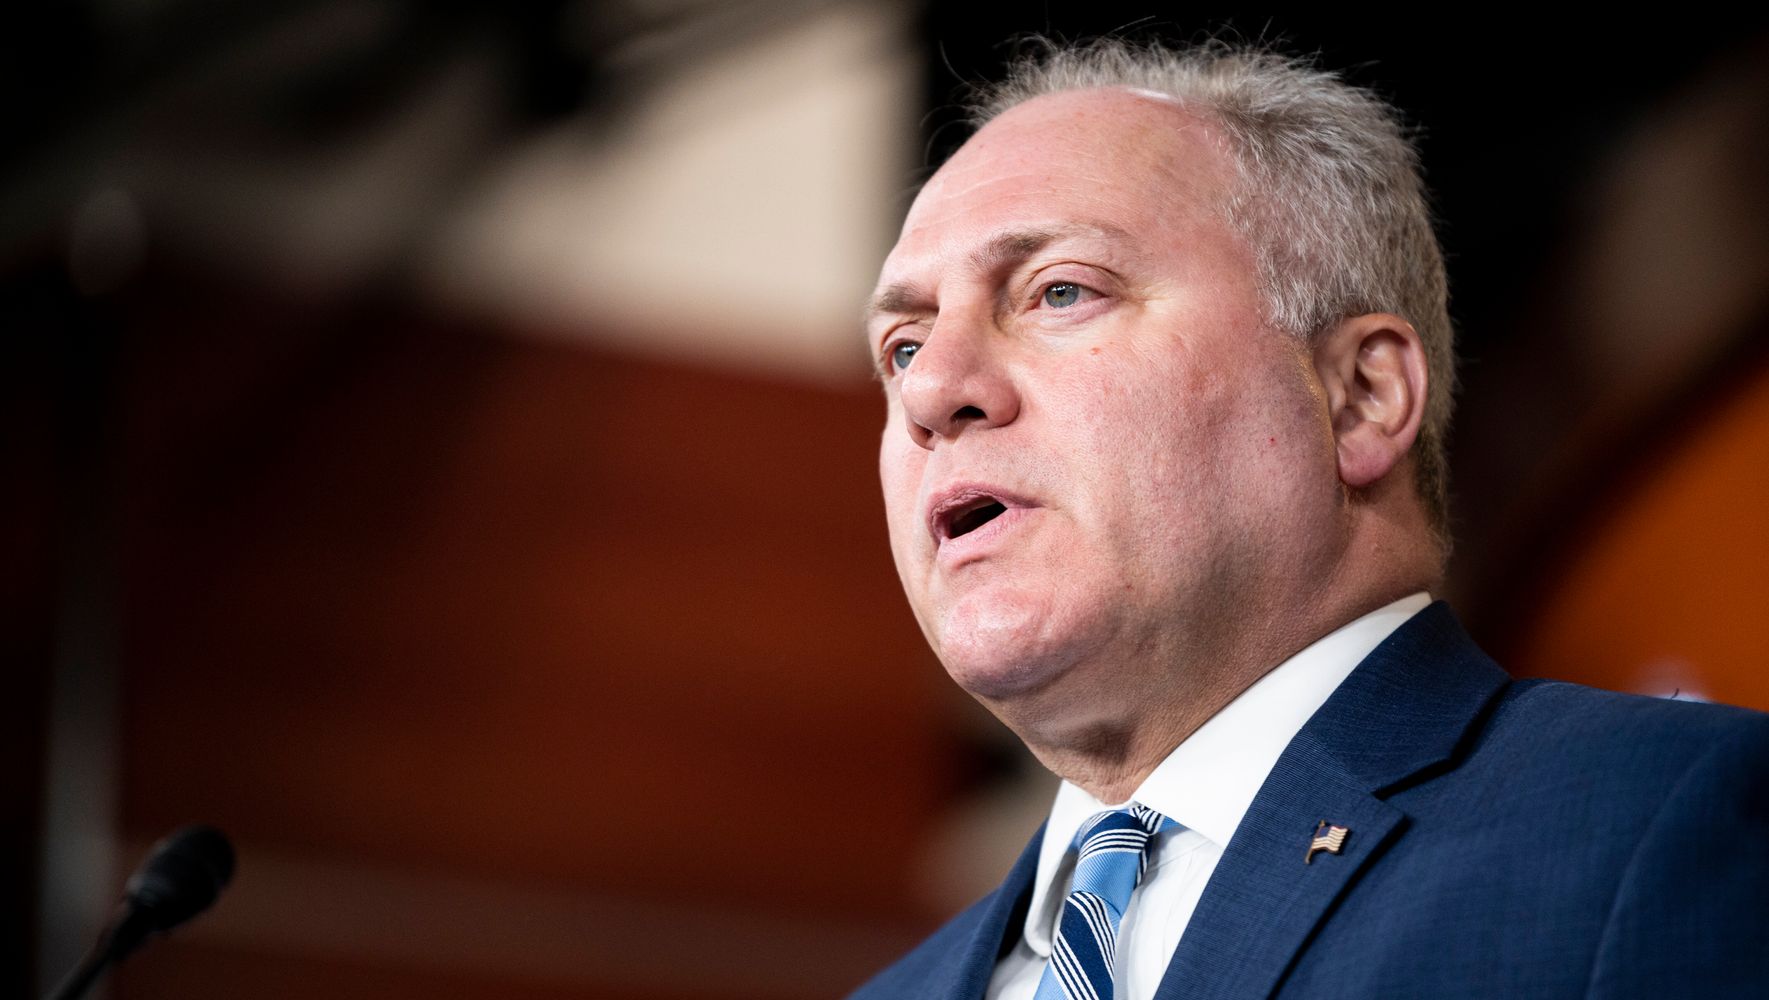 Rep. Steve Scalise Finally Gets COVID-19 Vaccine, Asserts It’s ‘Safe And Effective’